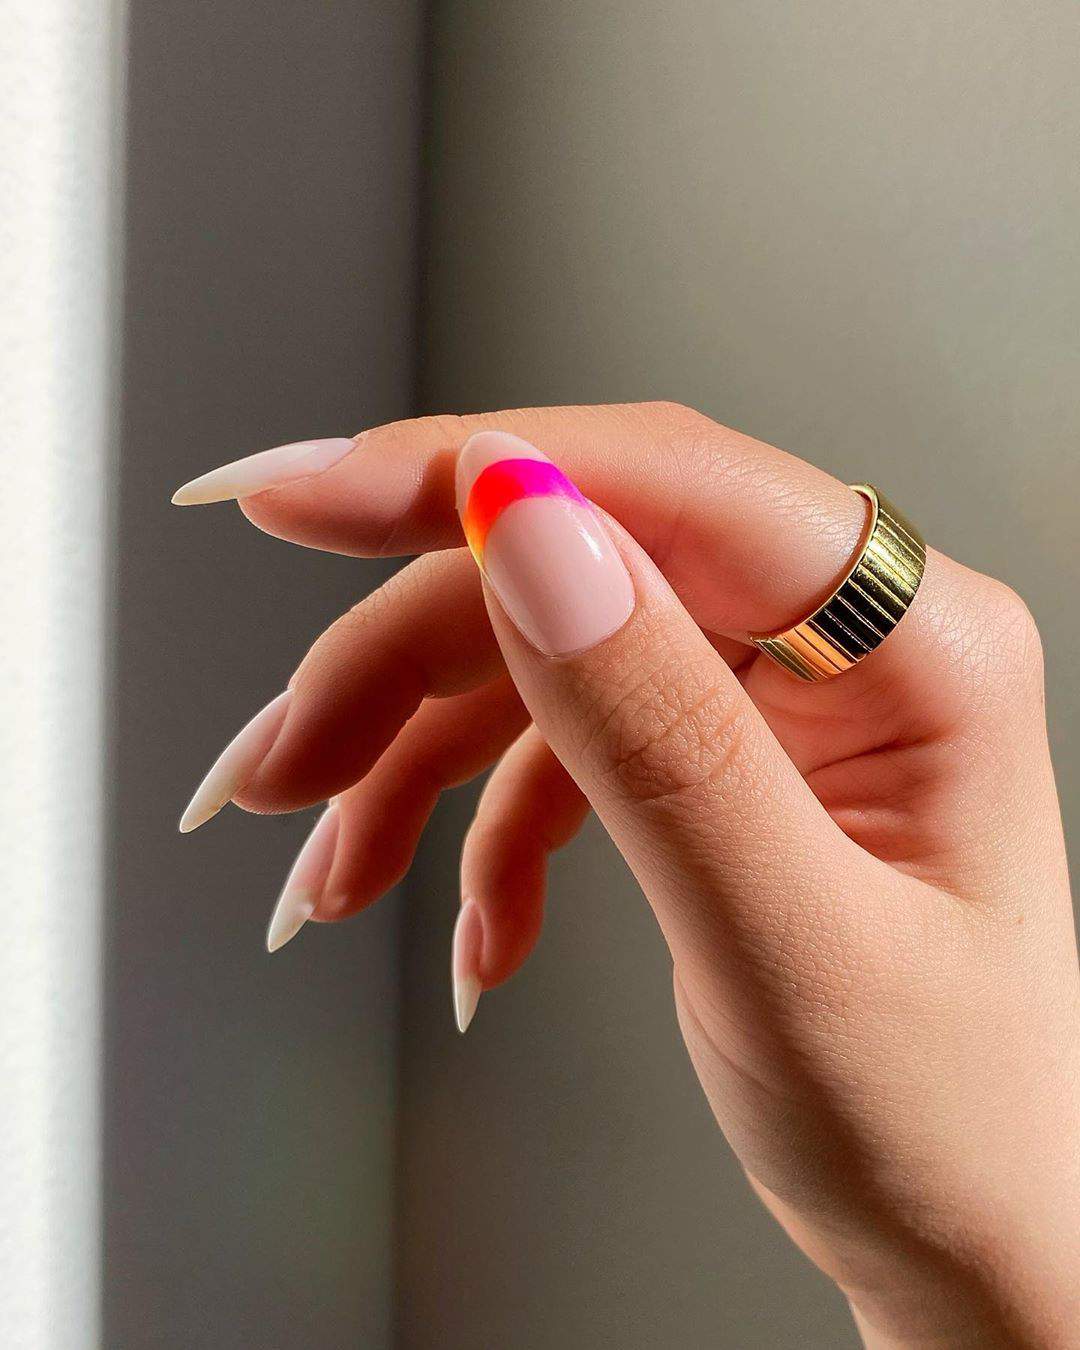 50 Best Nail Designs Trends To Try Out In 2022 images 8